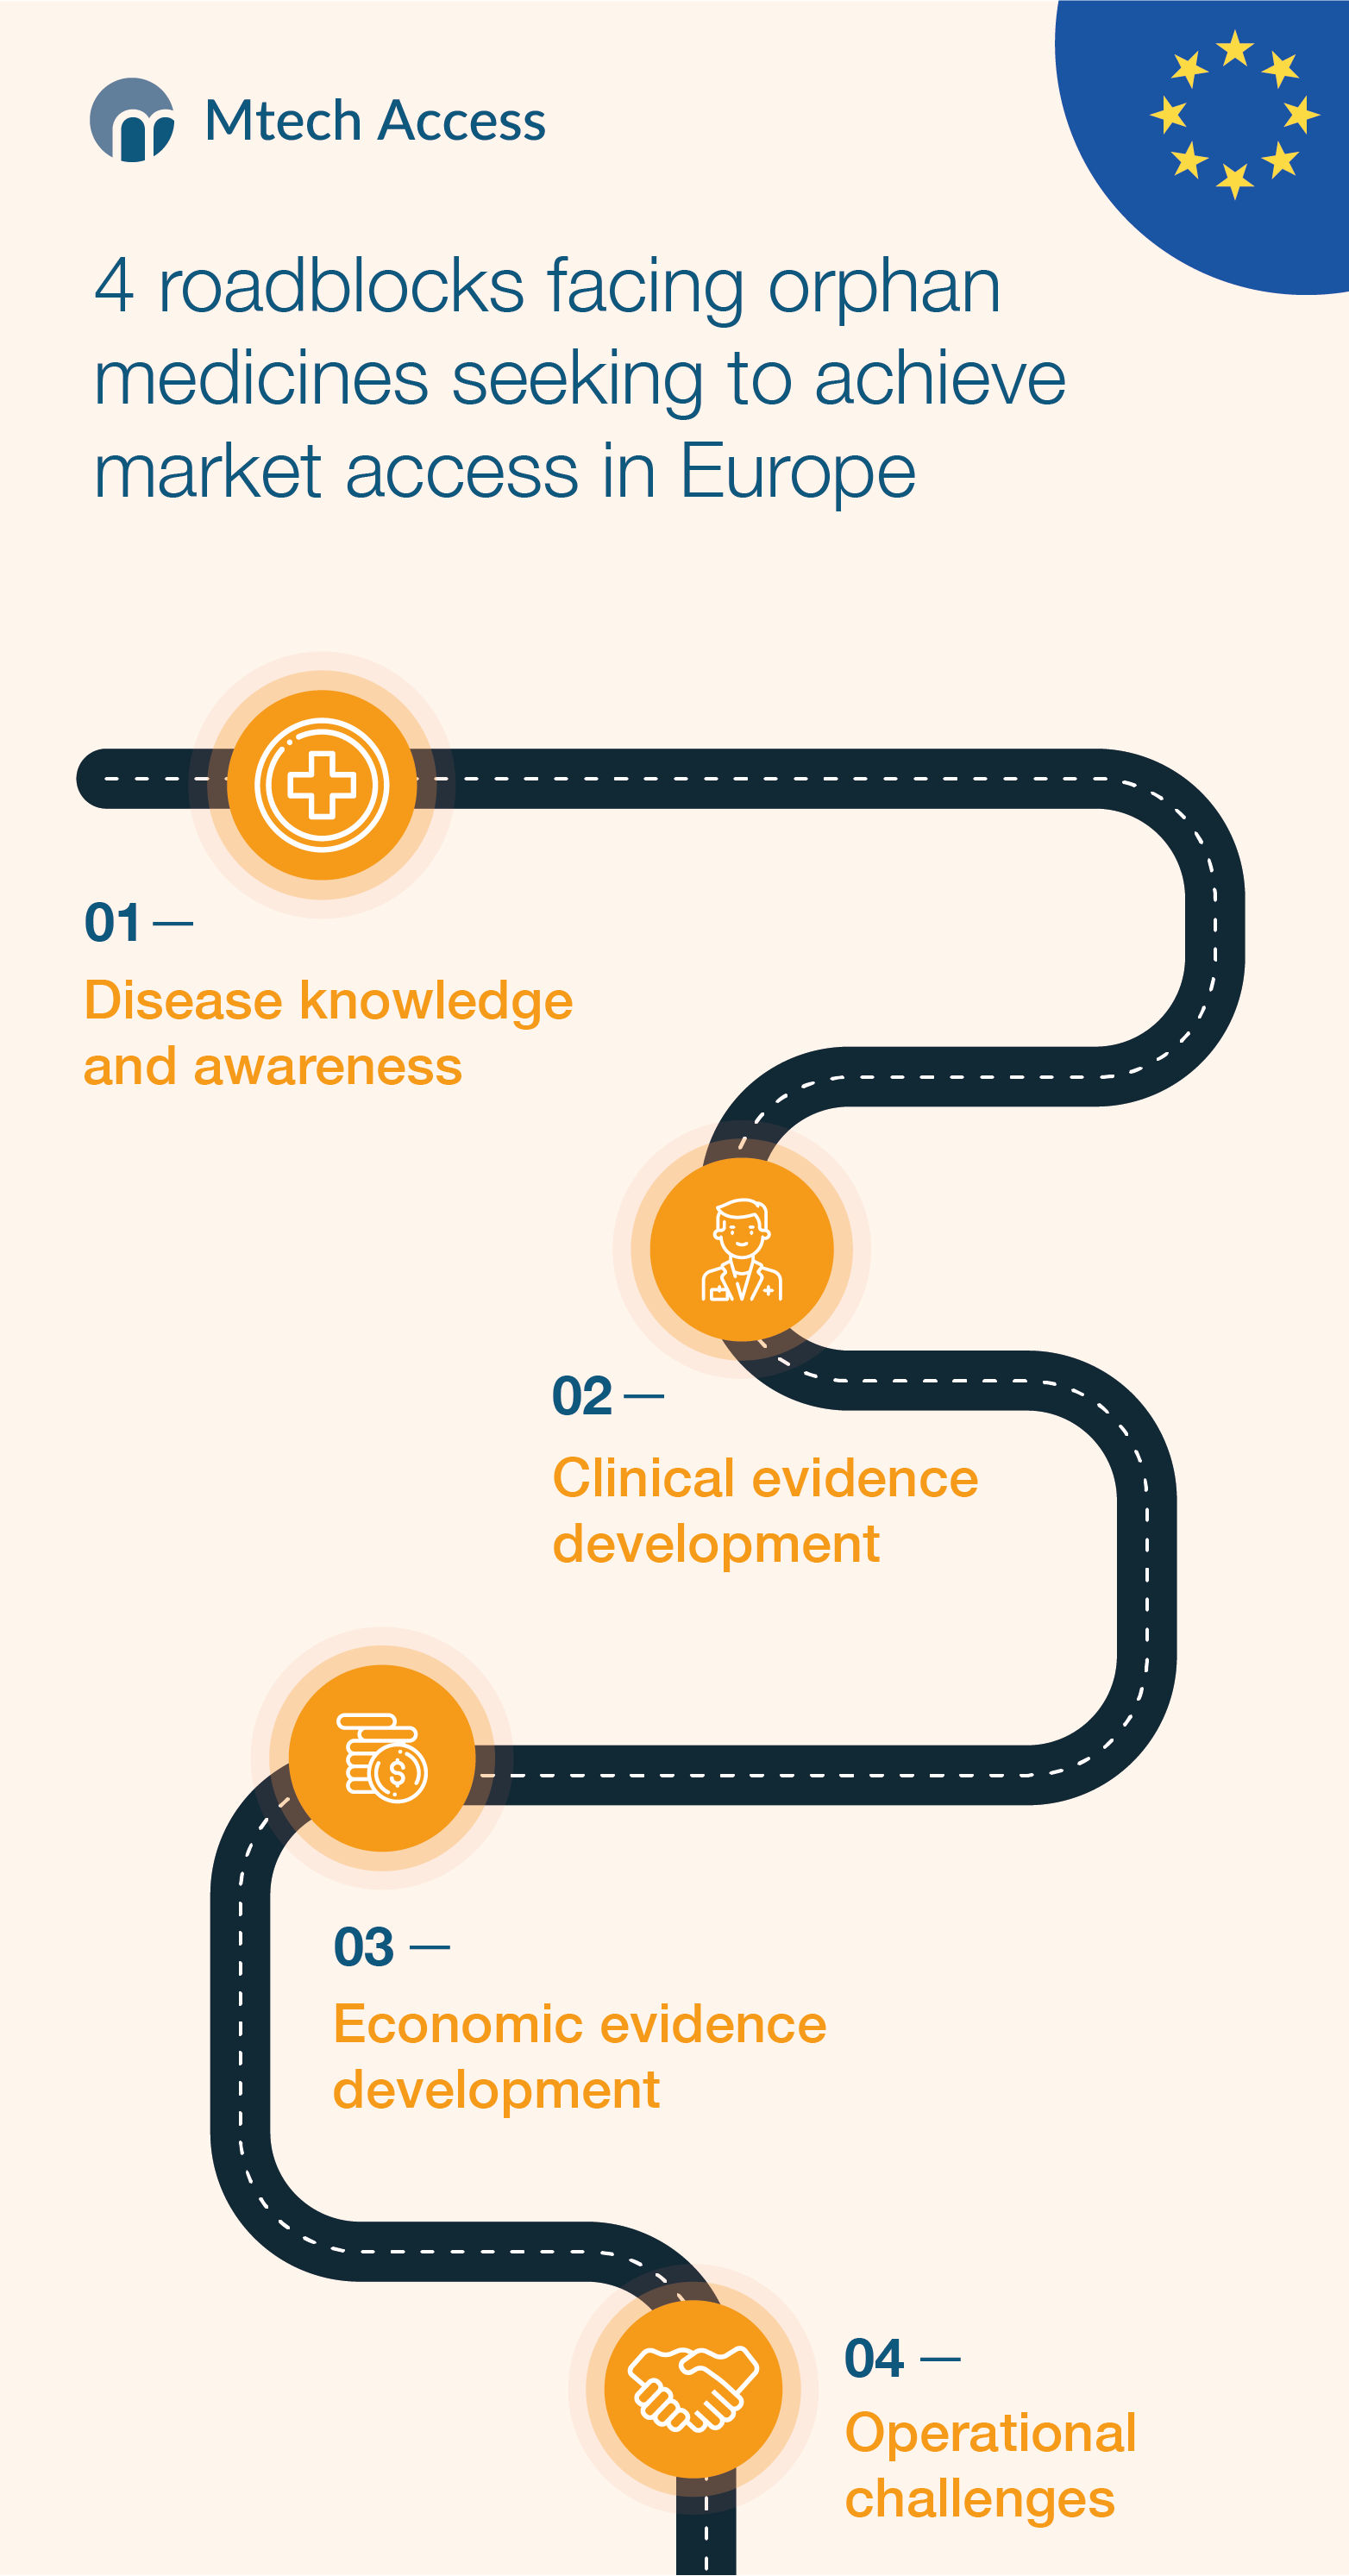 4 roadblocks facing orphan medicines seeking to achieve market access in Europe: 1) disease knowledge and awareness, 2) Clinical evidence development, 3) Economic evidence development, 4) Operational challenges